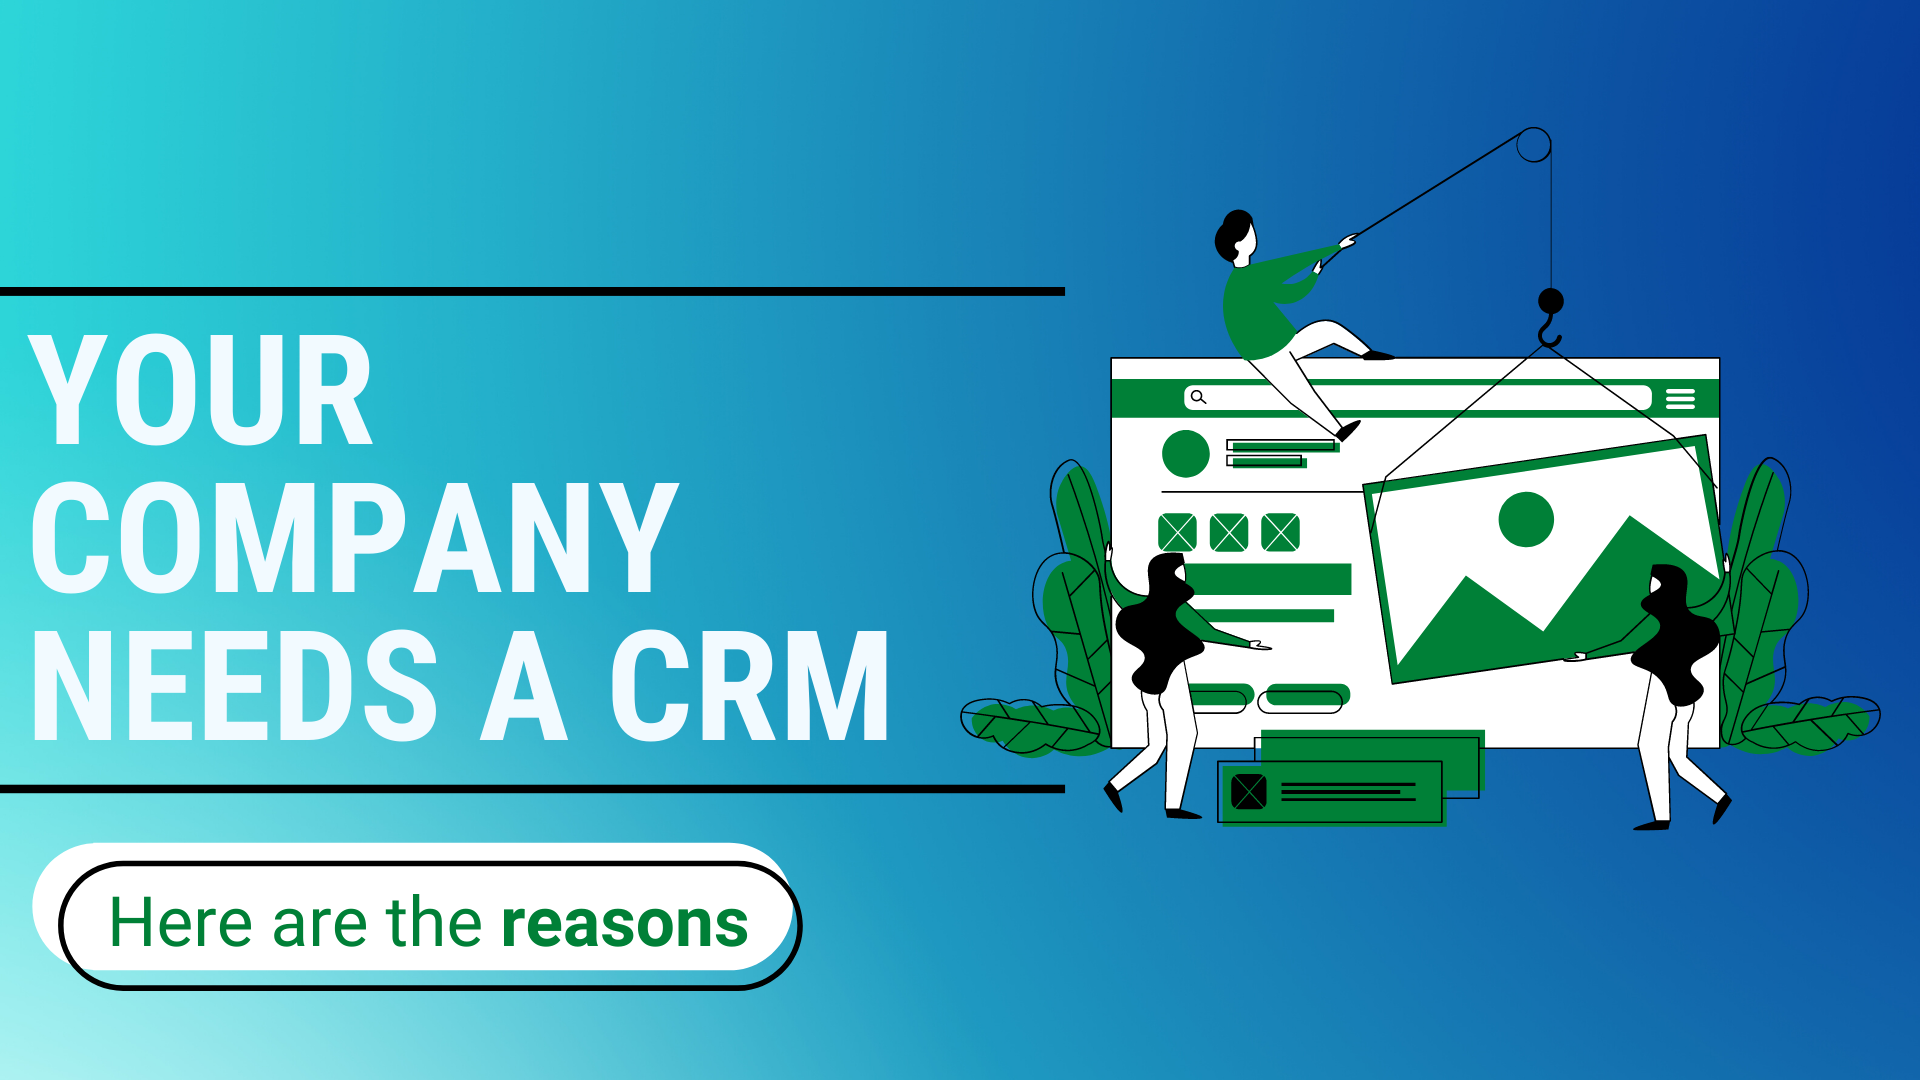 10 Reasons Why Your Company Needs A CRM